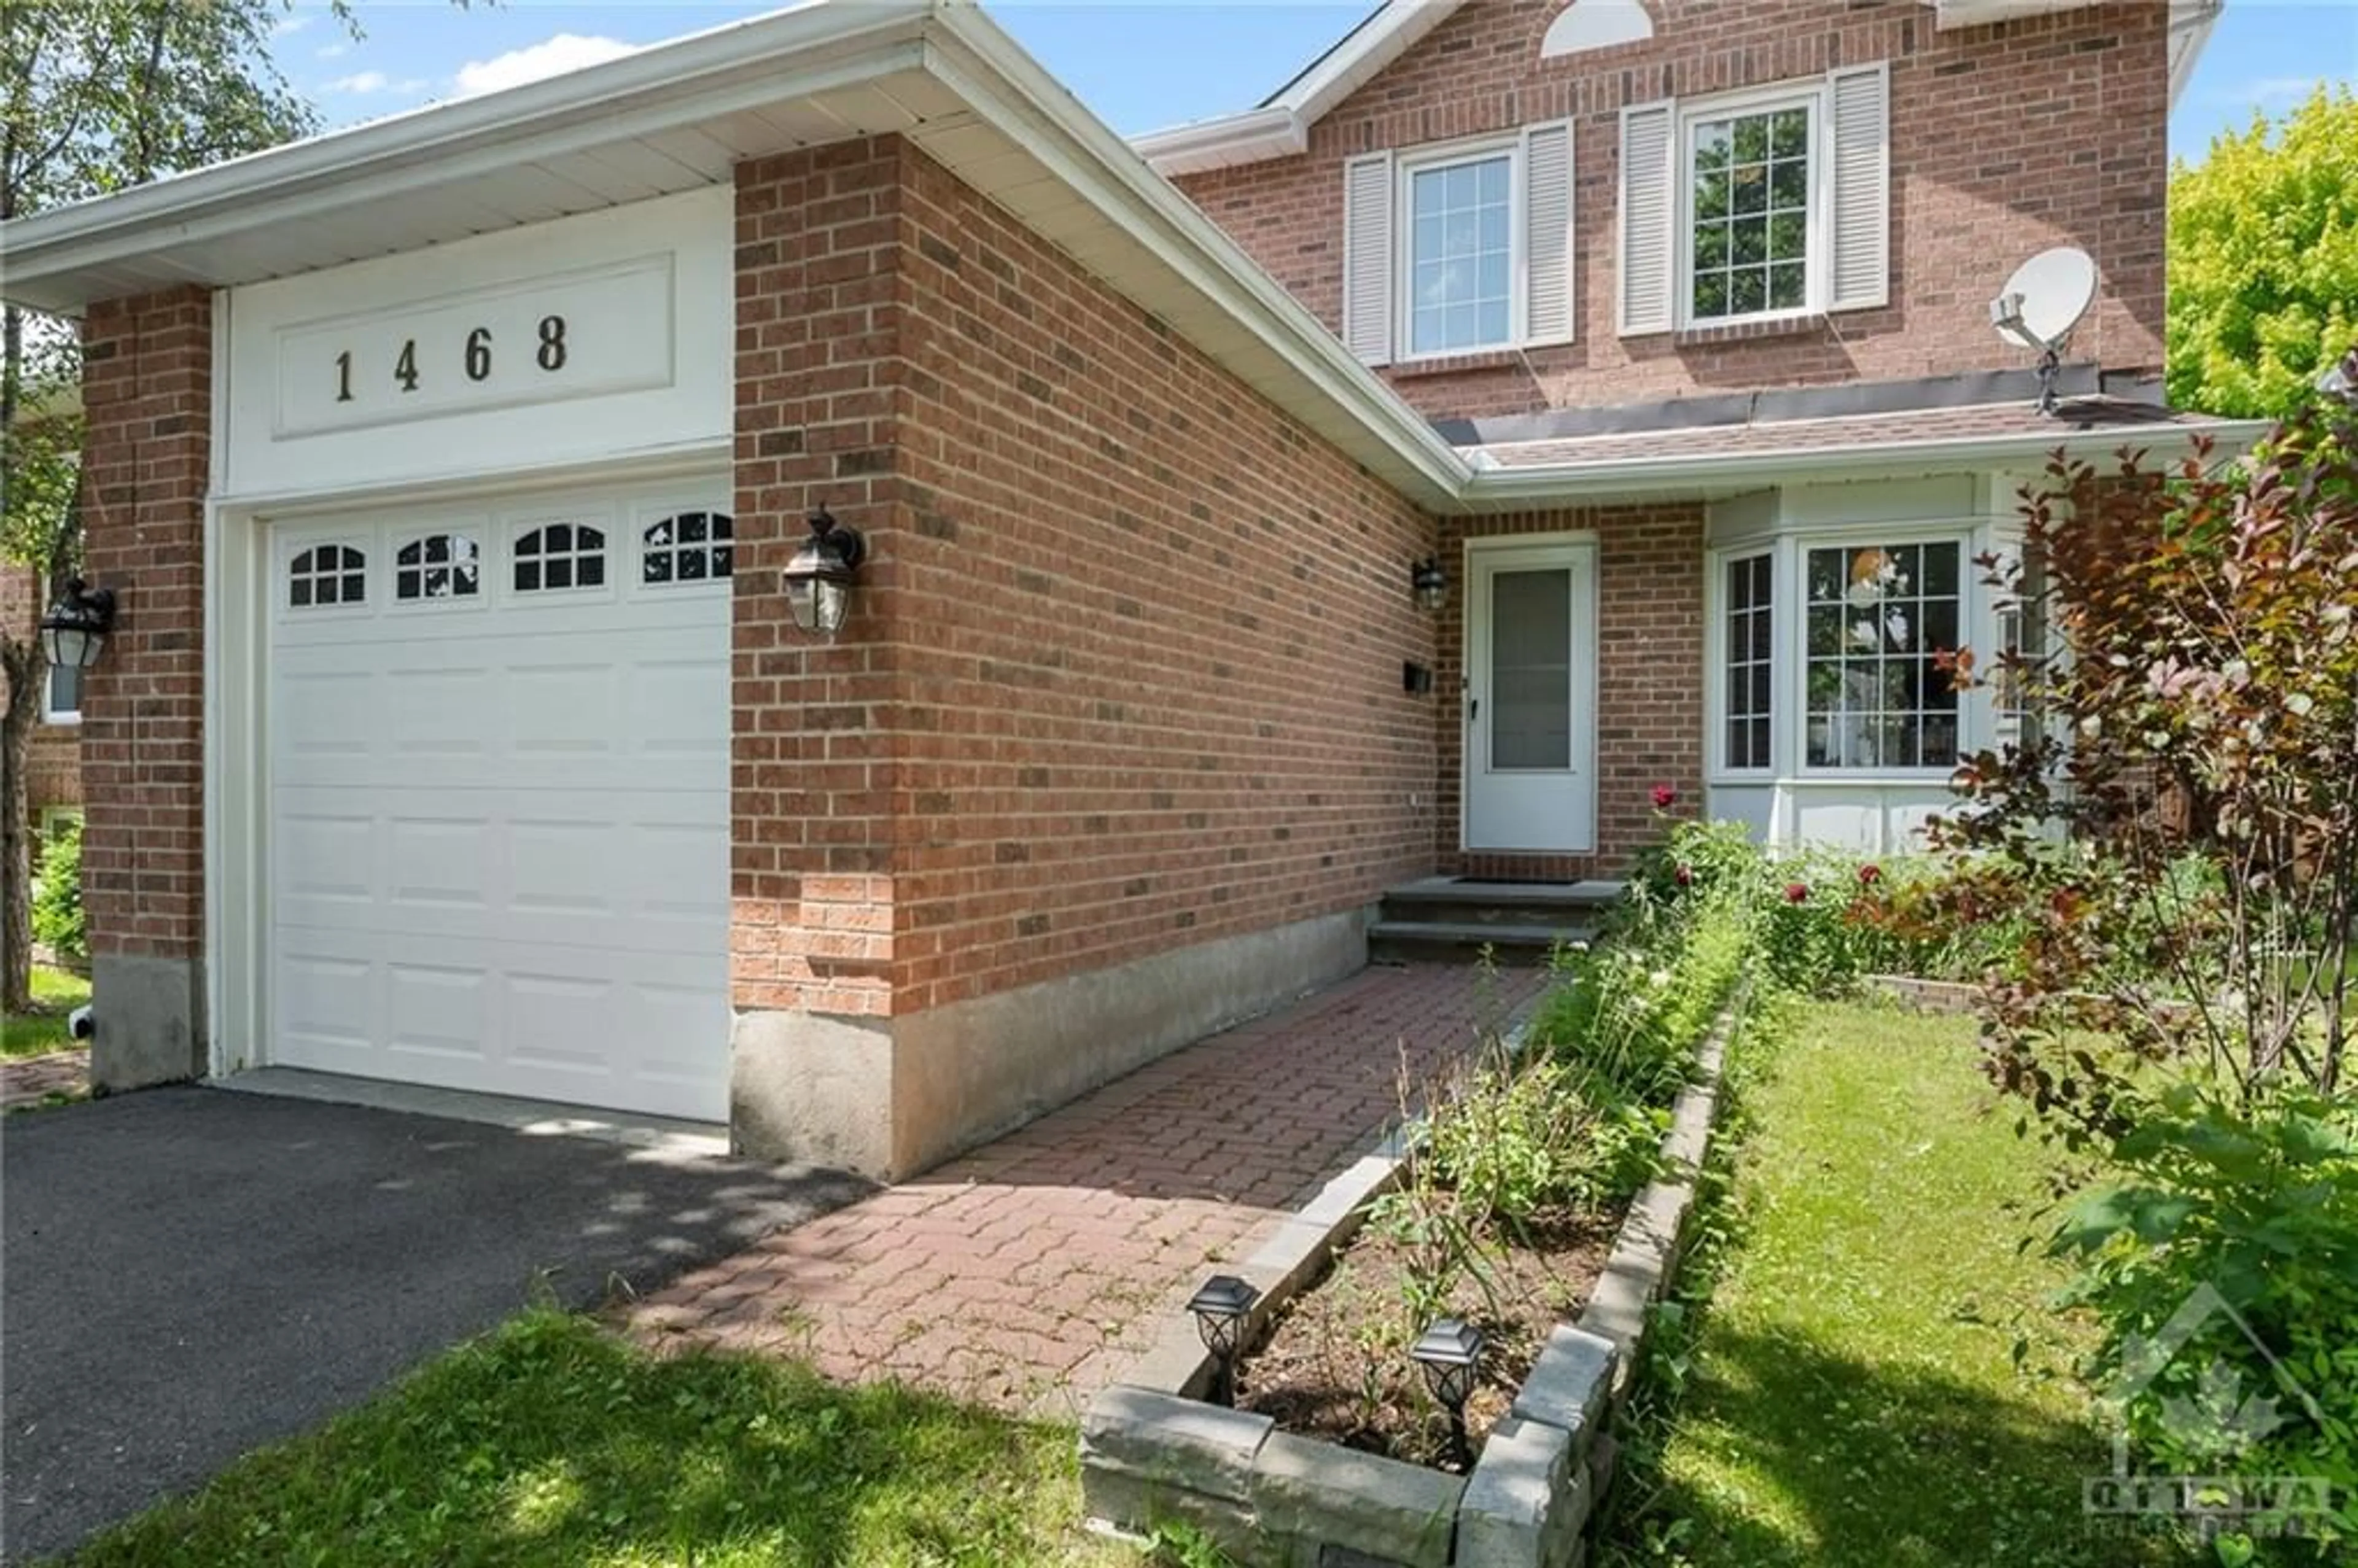 Home with brick exterior material for 1468 SHAWINIGAN St, Ottawa Ontario K4A 2M8